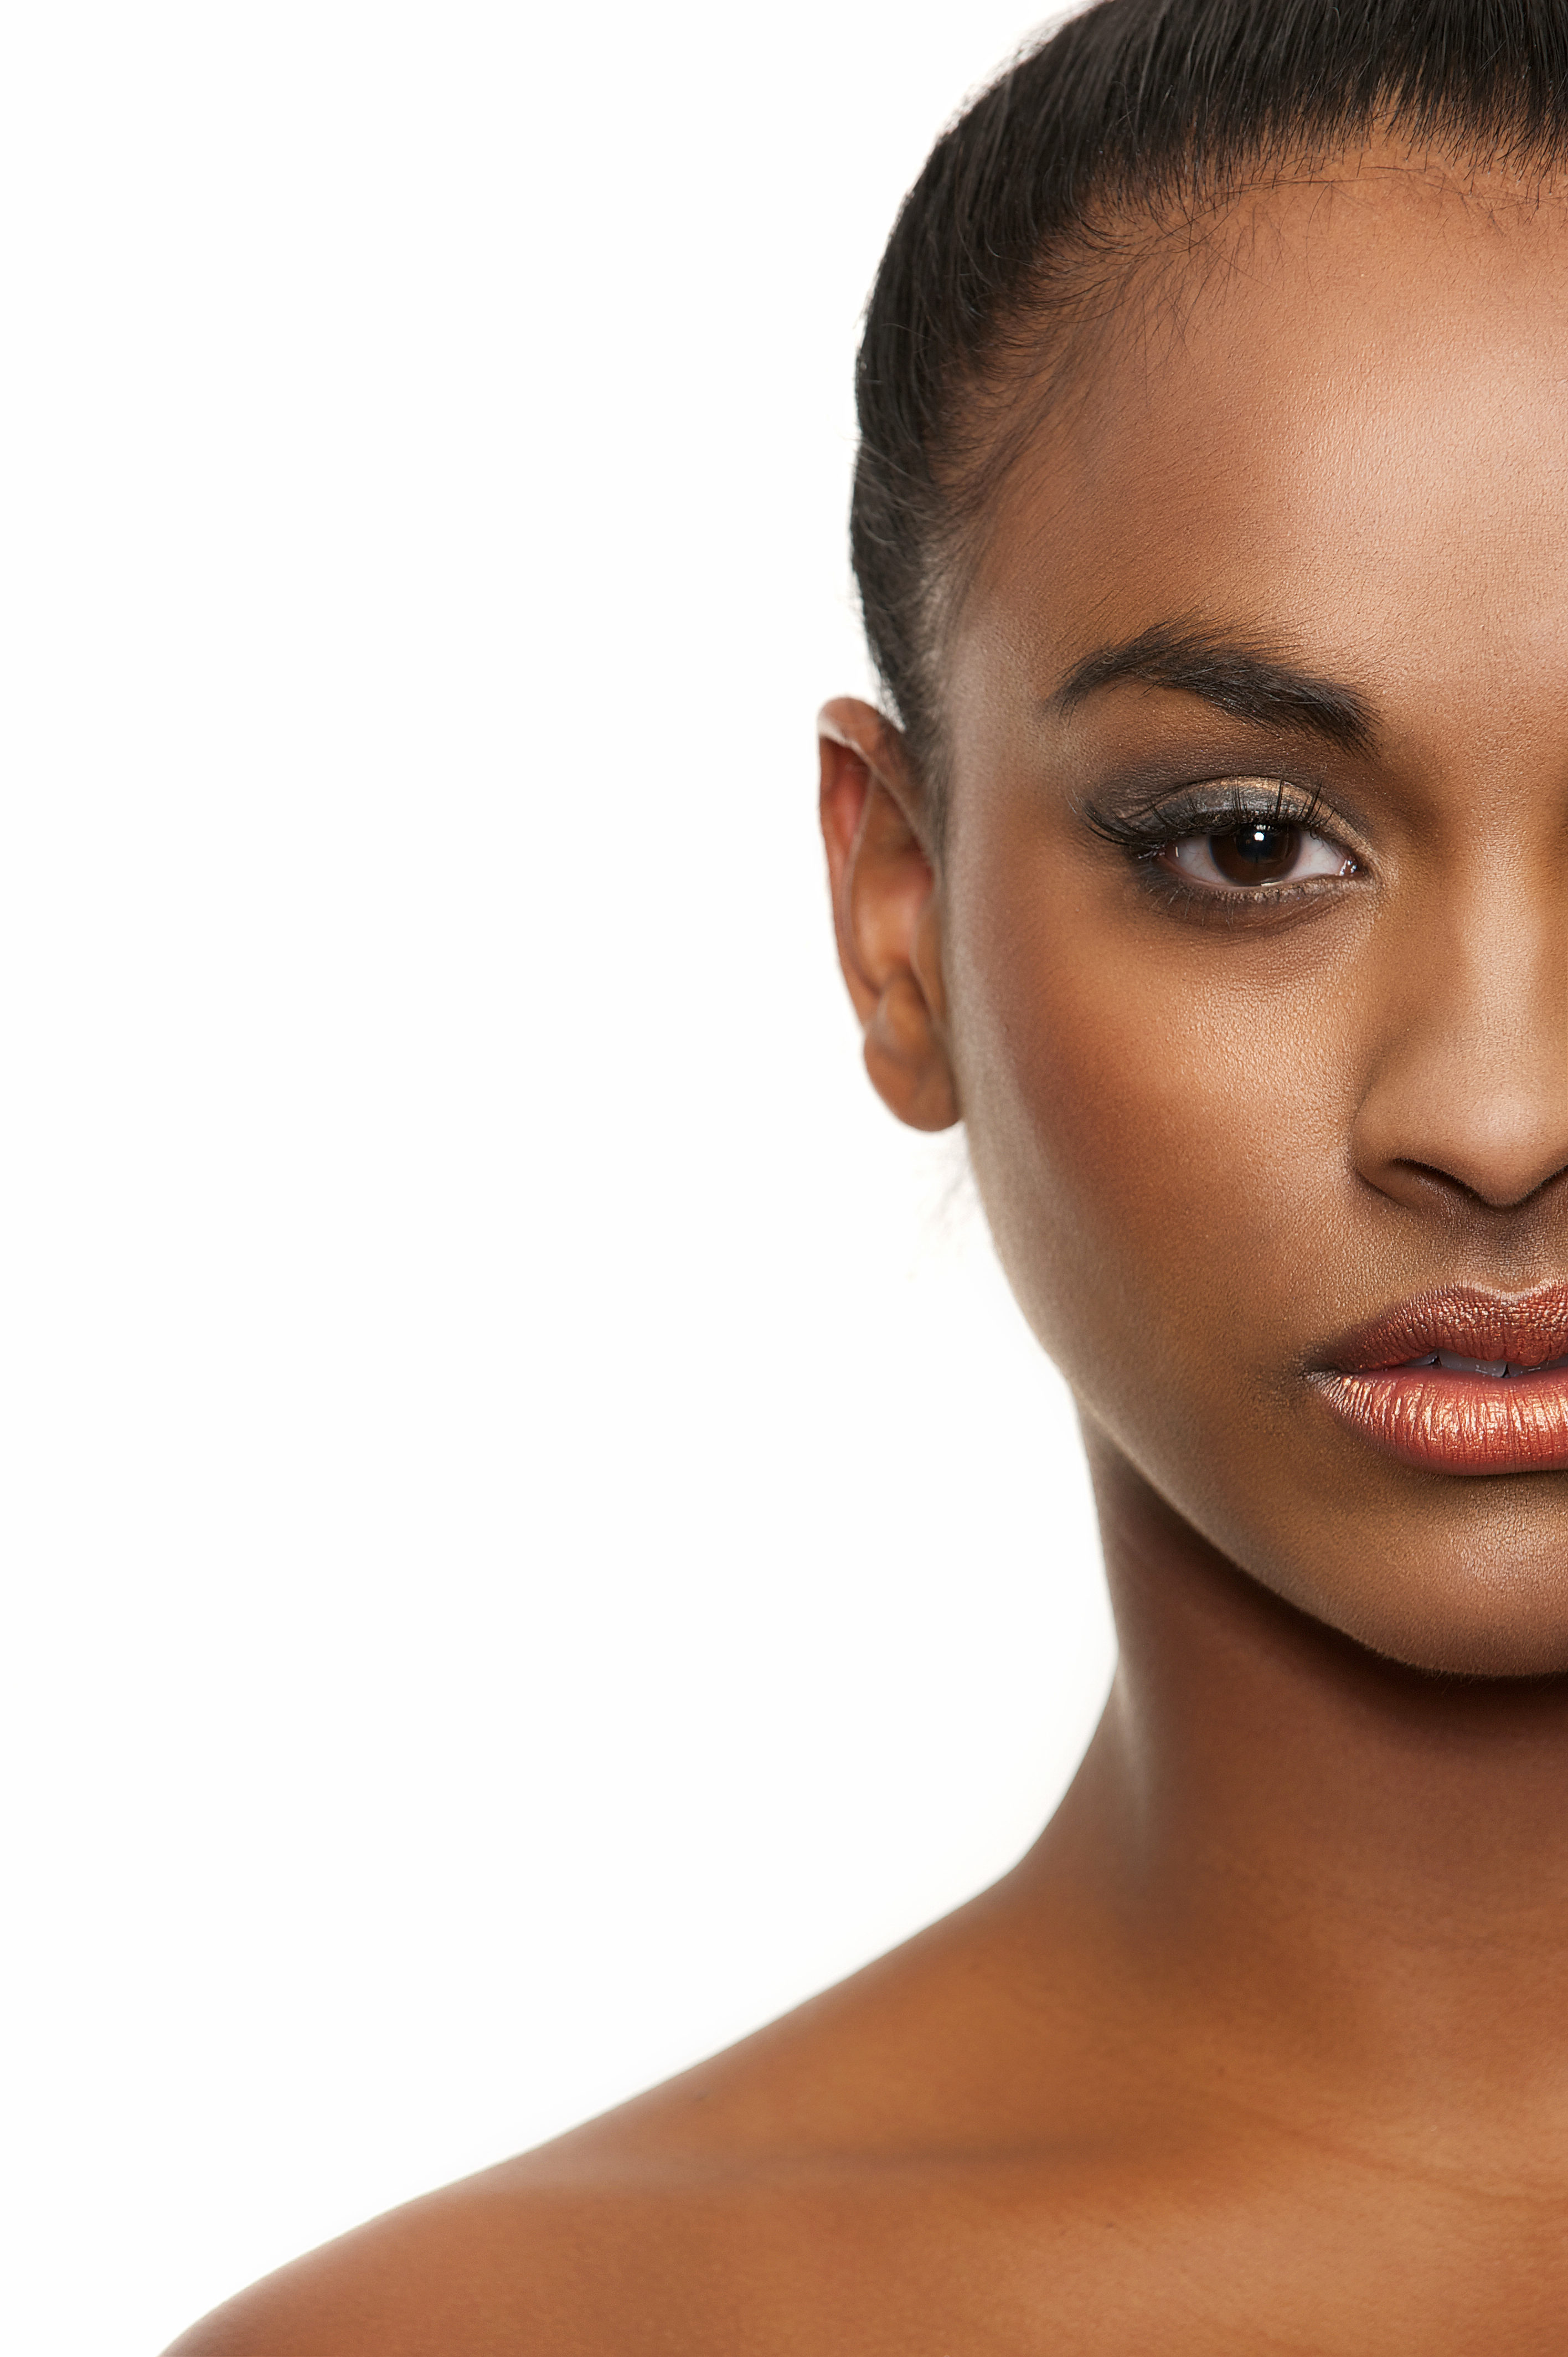 5 Things You Need To Get Perfect Skin